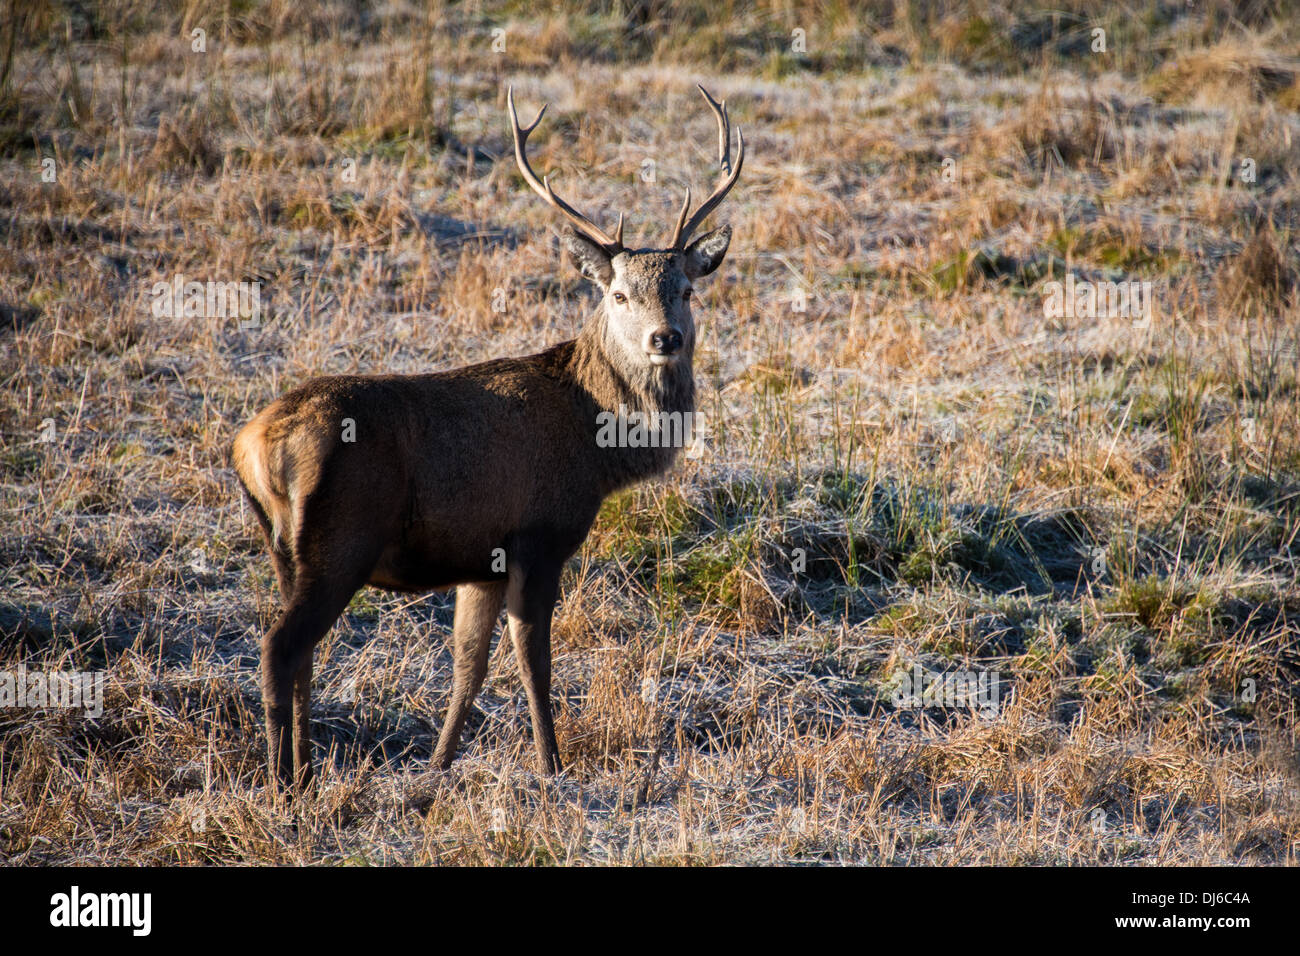 Scottish red deer stag in early morning light Banque D'Images